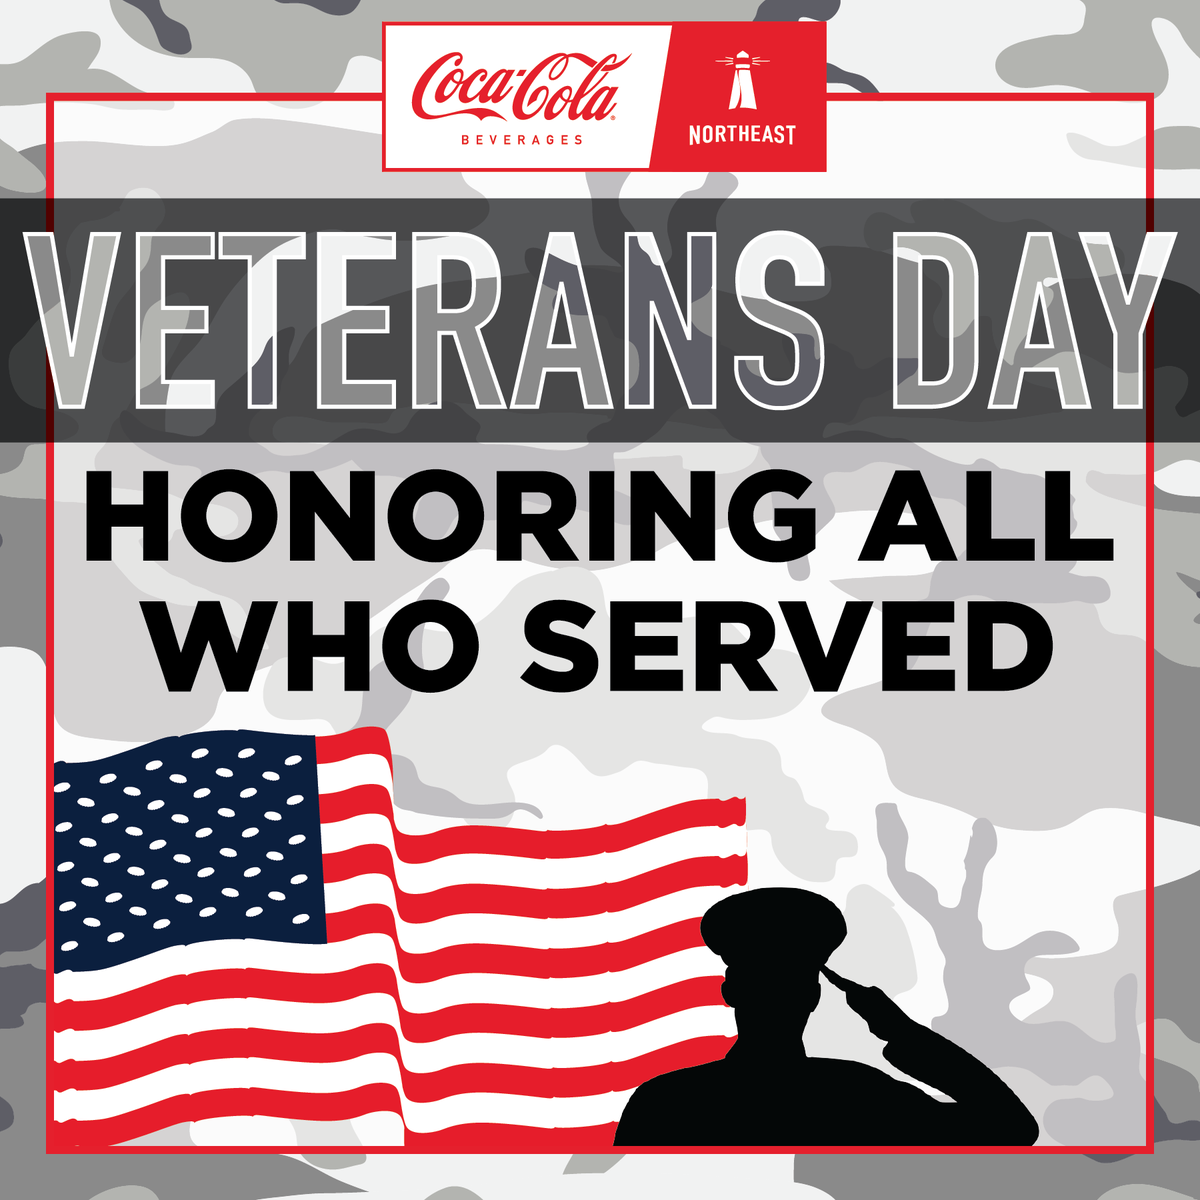 Today we pause to express our deep gratitude to Veterans for their brave & selfless service to our country. We would specifically like to offer our heartfelt thanks to every Coke NE associate who has worn the uniform of the United States Armed Forces. Thank you for your service.